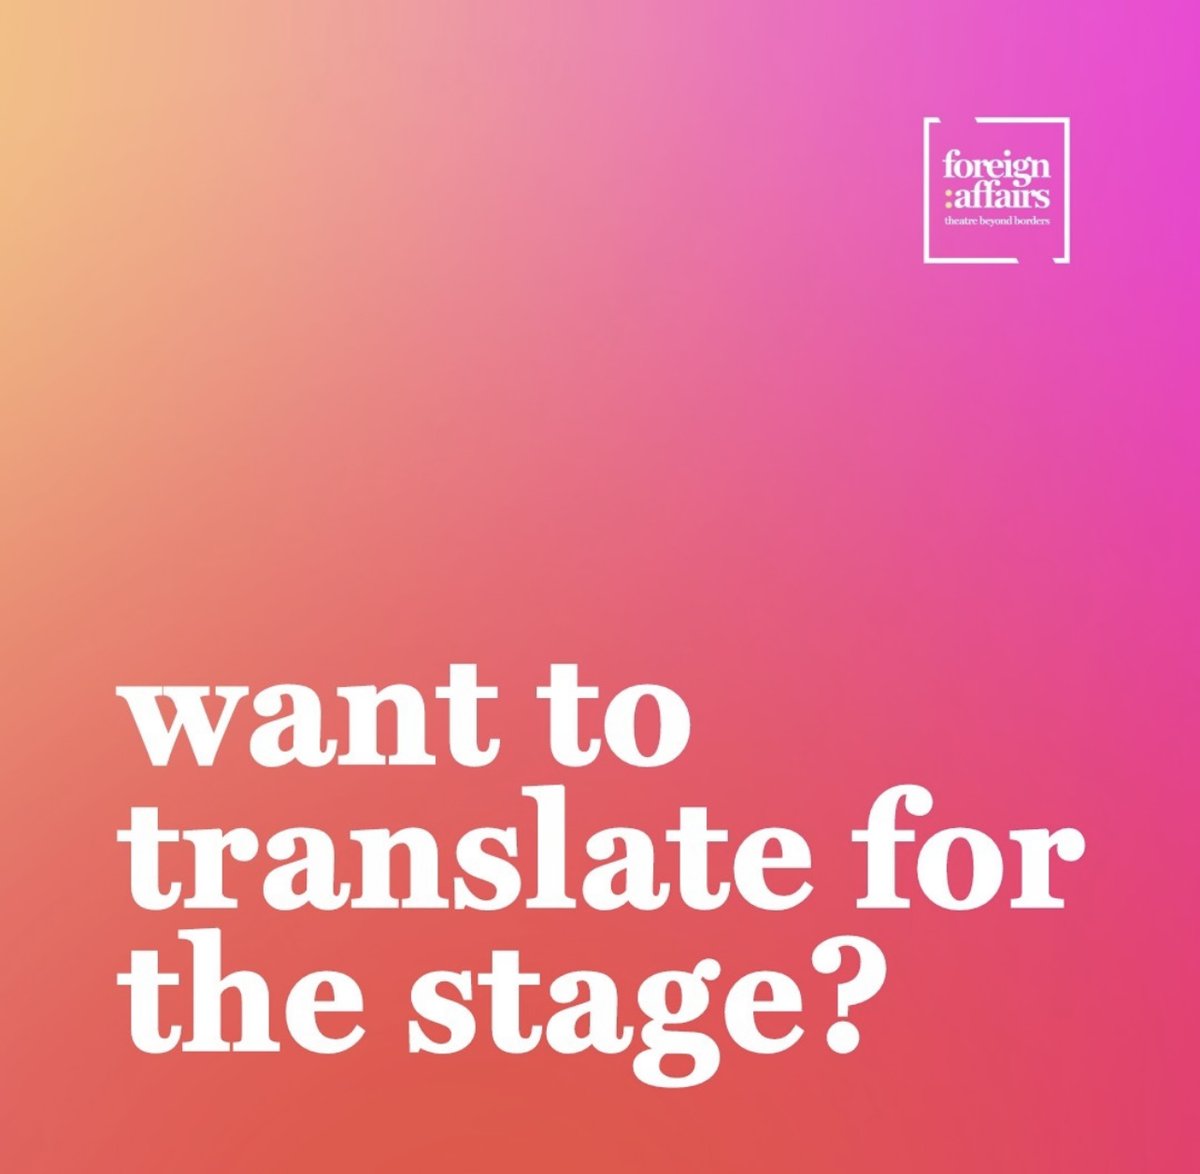 Here's what we're supporting in the arts world this month: Apply now for 👇 @leedsplayhouse & @tuttifruttiprod Jerwood Resident Designer placement: leedsplayhouse.org.uk/job/jerwood-re… And @weare4naffairs Theatre Translator Mentorship: foreignaffairs.org.uk/theatre-transl…